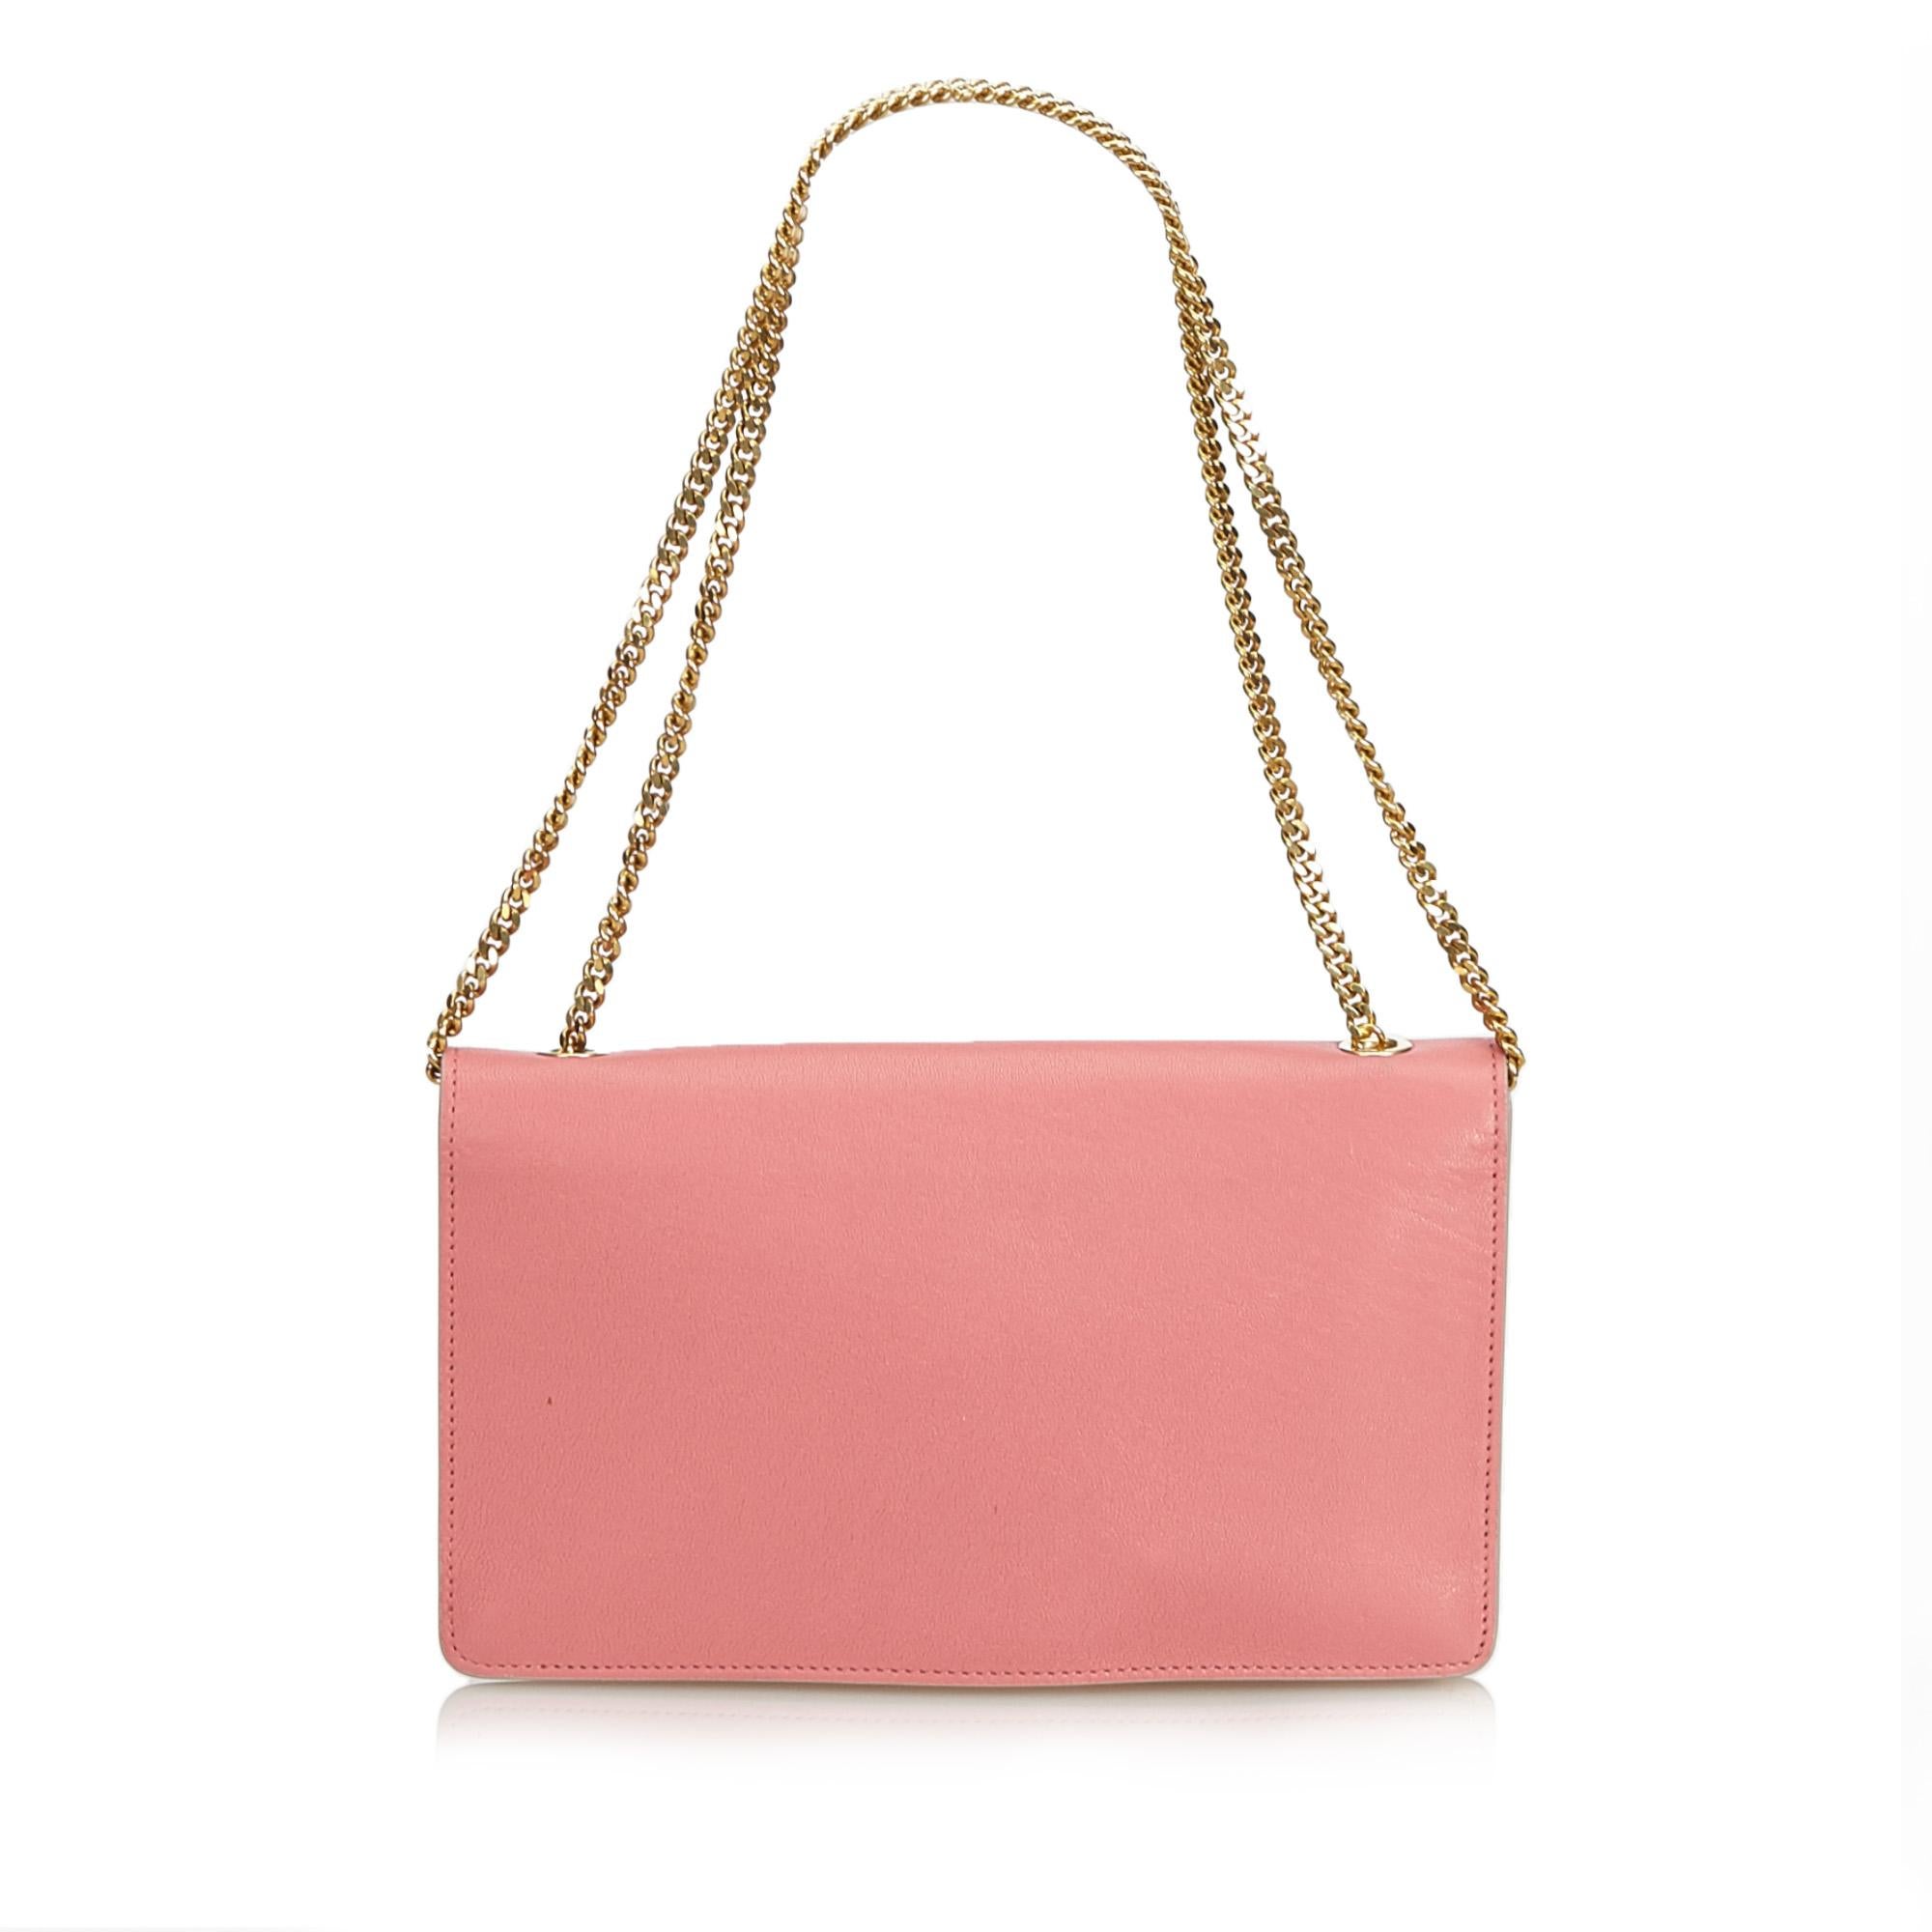 Chloe Pink Leather Chain Shoulder Bag In Good Condition For Sale In Orlando, FL